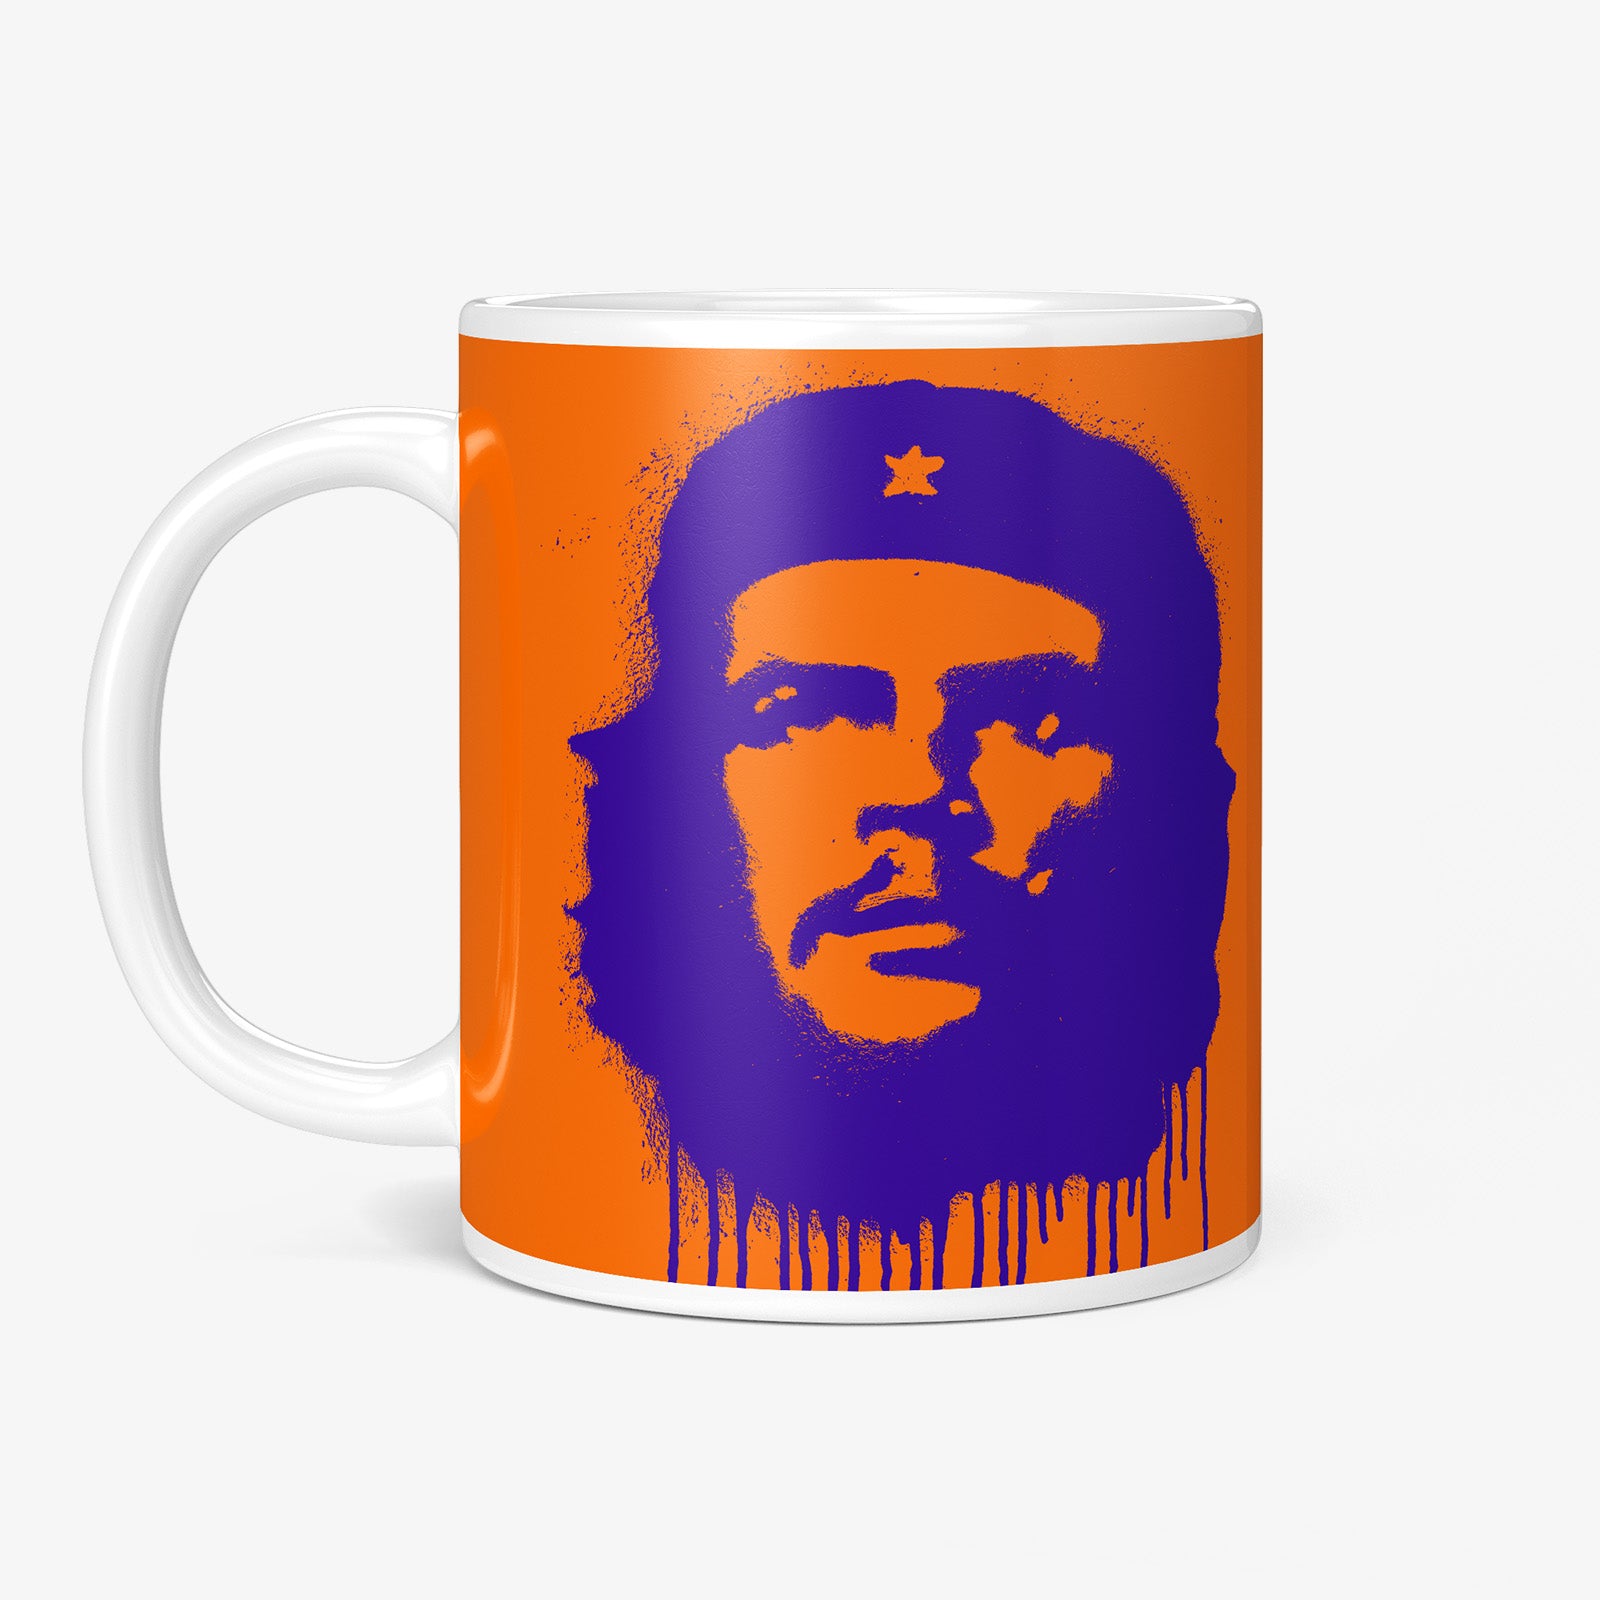 Be inspired by our "Ernesto Che Guevara" Pop Navy Coffee Mug. Featuring a 11oz size with the handle on the left.